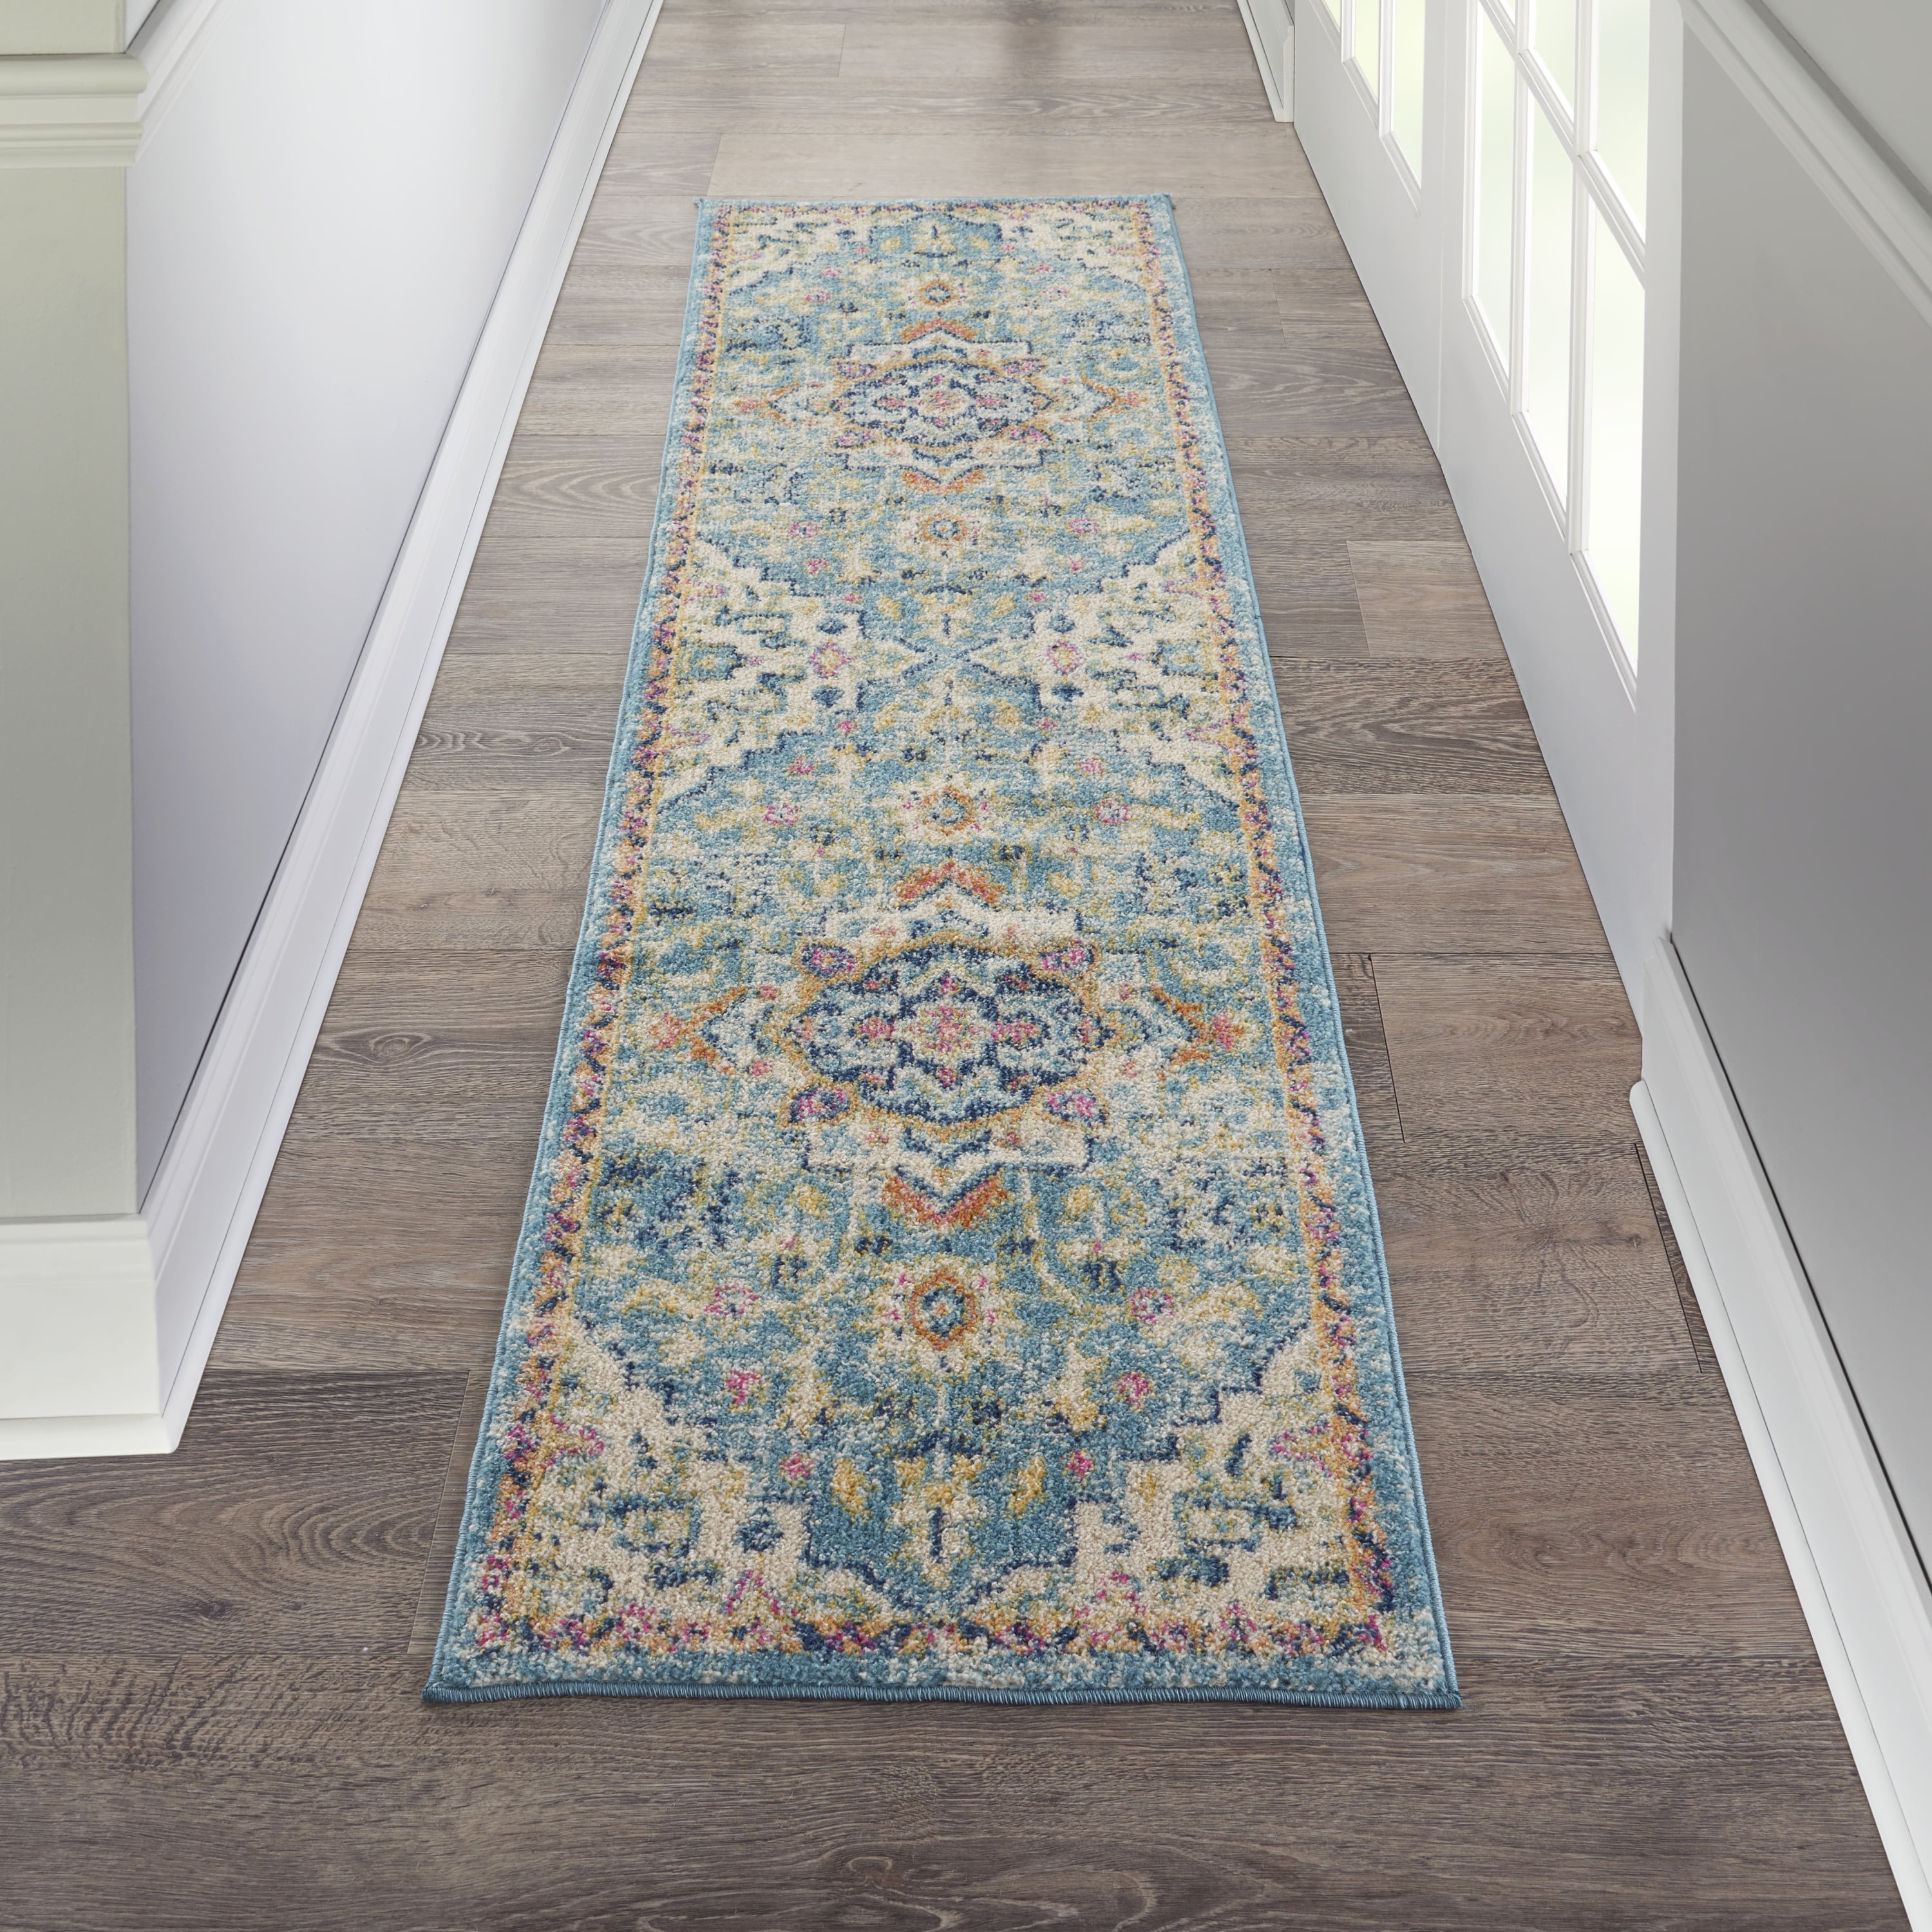 Neutral Decor & Floor Cover 2'2 x 7'6 Runner Bohemian Oriental Medallion Floral Pattern Boho Area Rug Gorgeous Persian Overdyed Powerloomed Soft Polypropylene Fiber Colorful Ivory Blue Area Rug